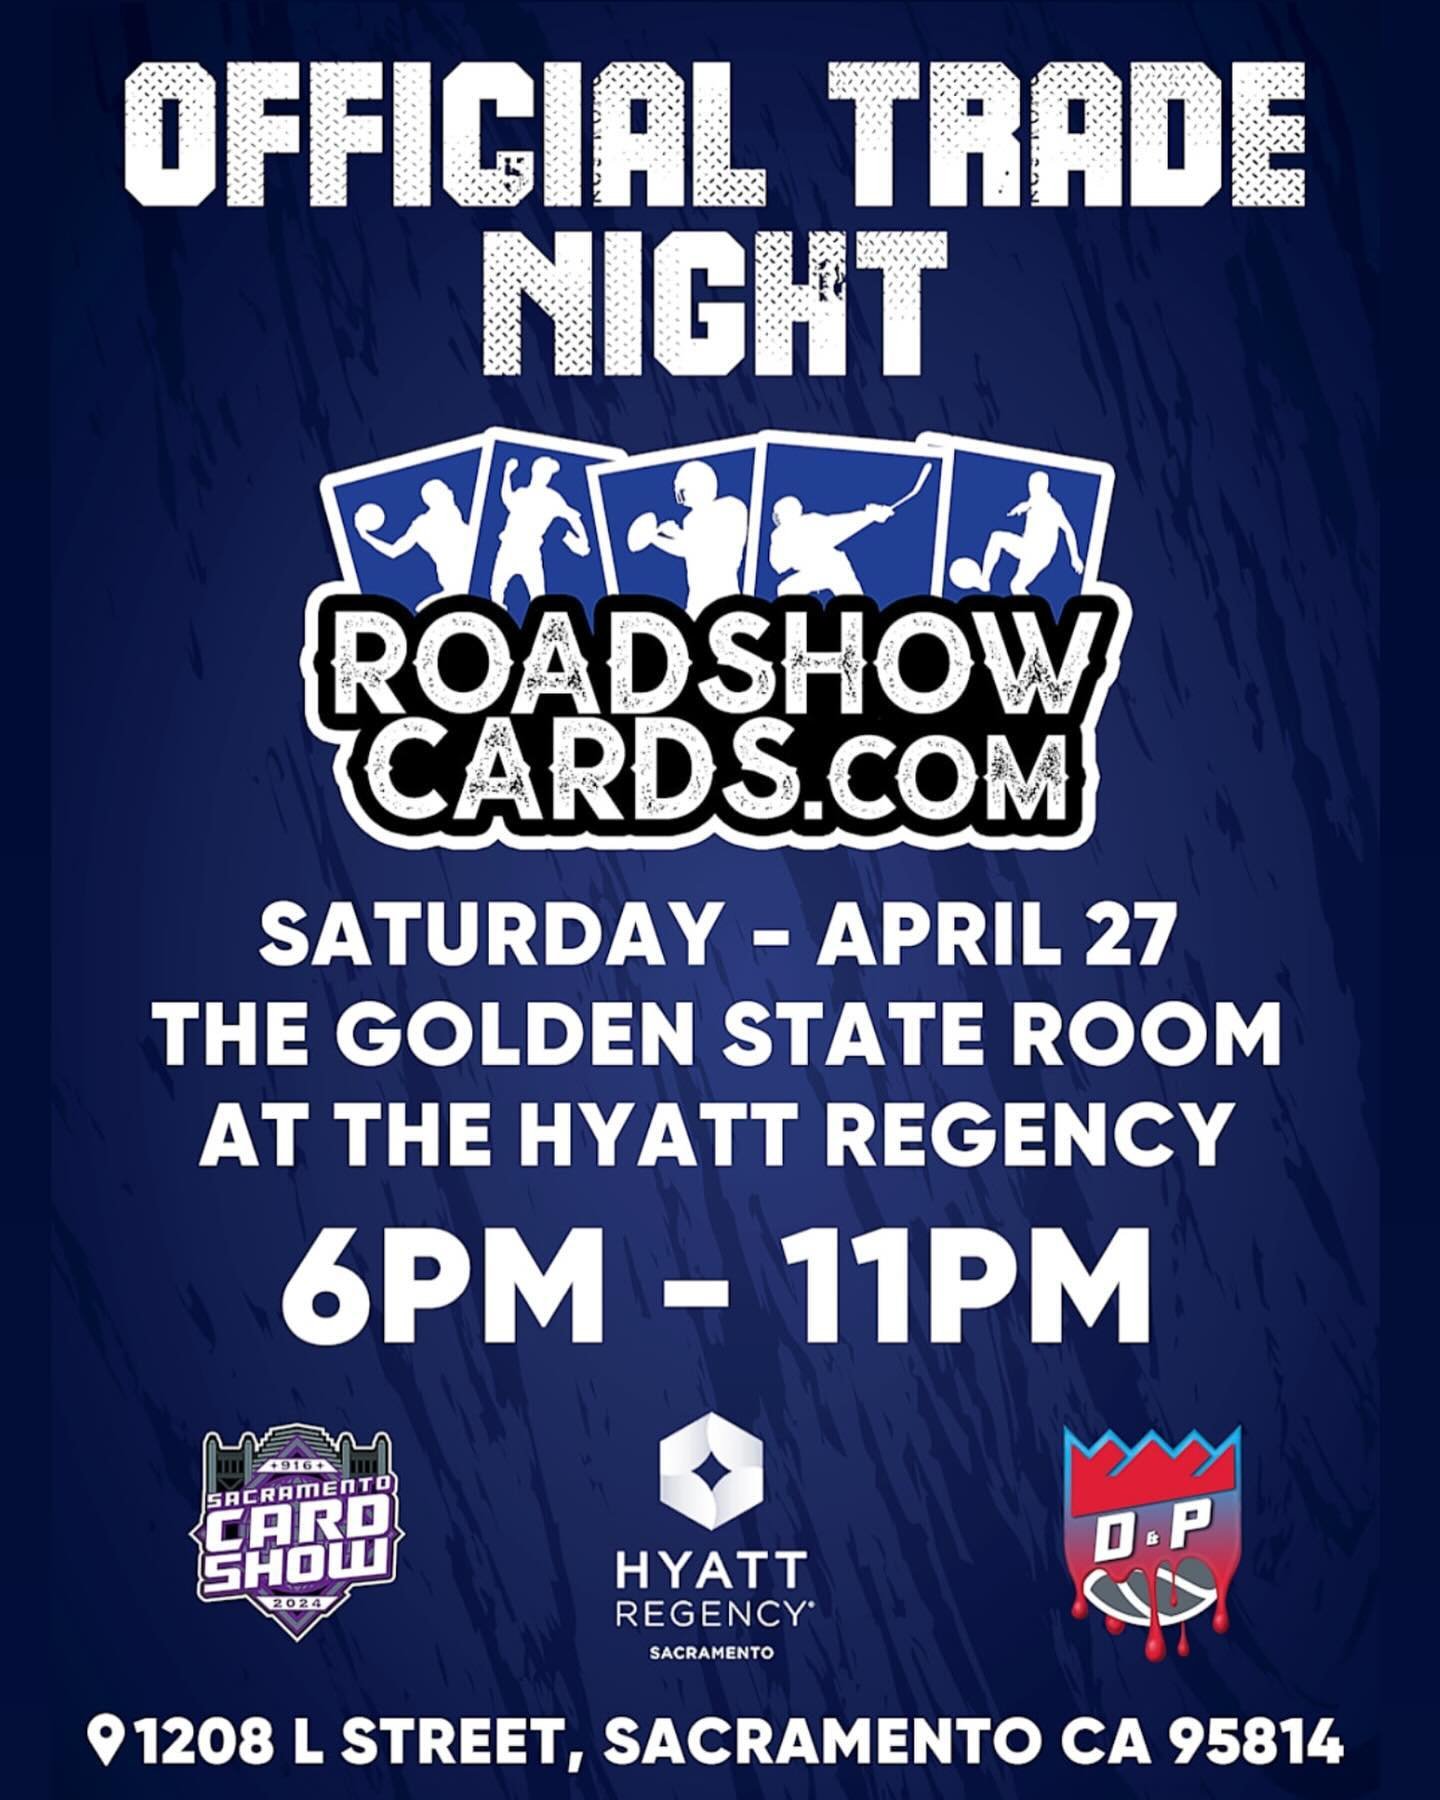 Saturday Night is the official trade night sponsored by the @roadshowcards ! Hope to see everyone there!